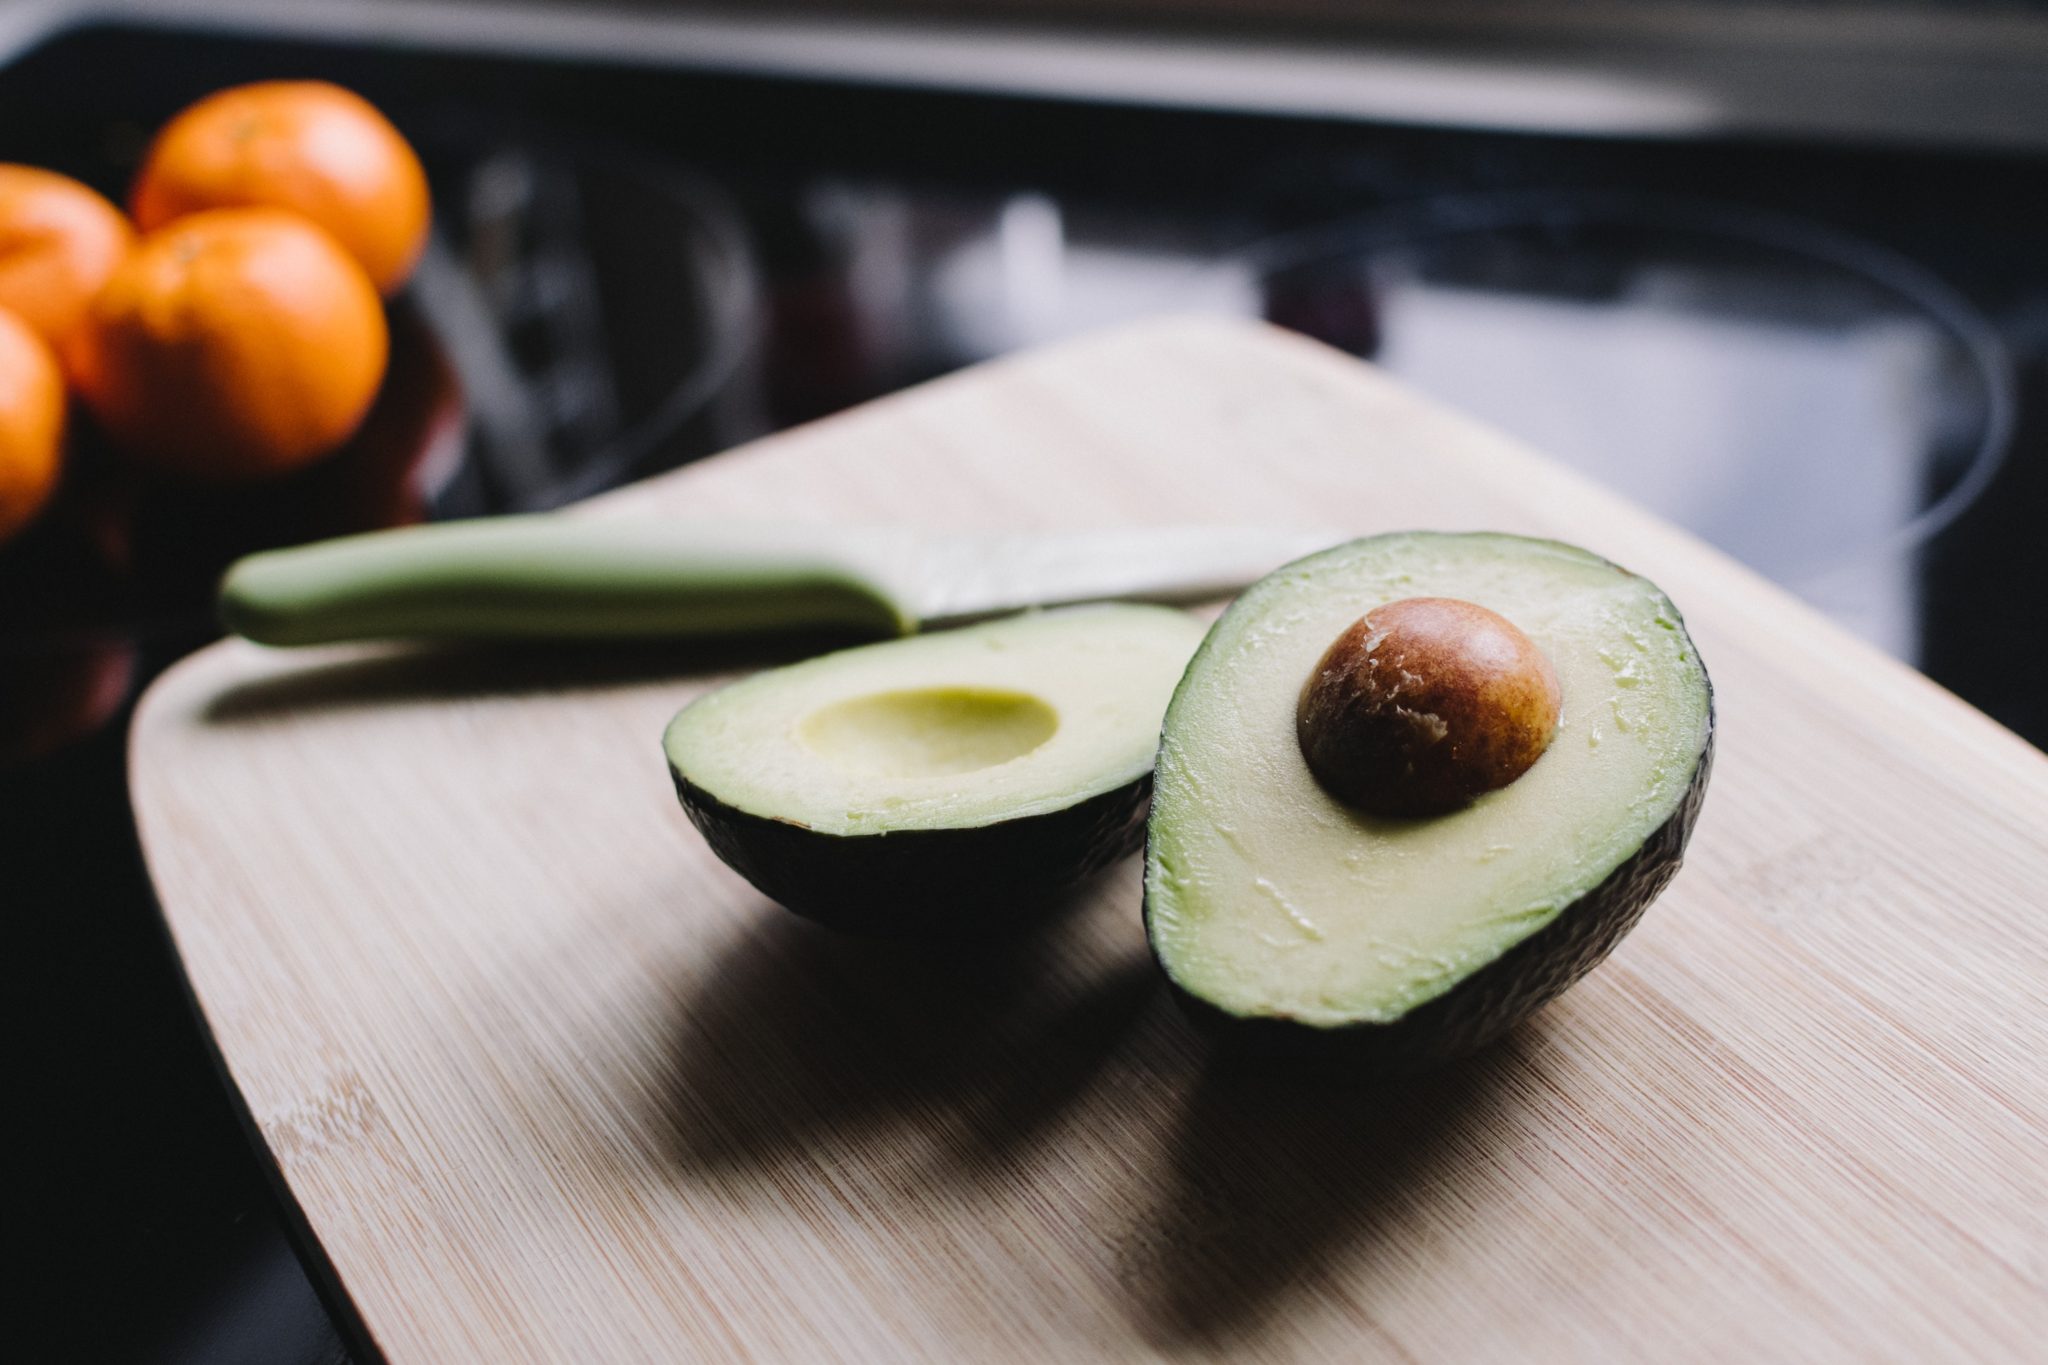 Eating an avocado is good for health